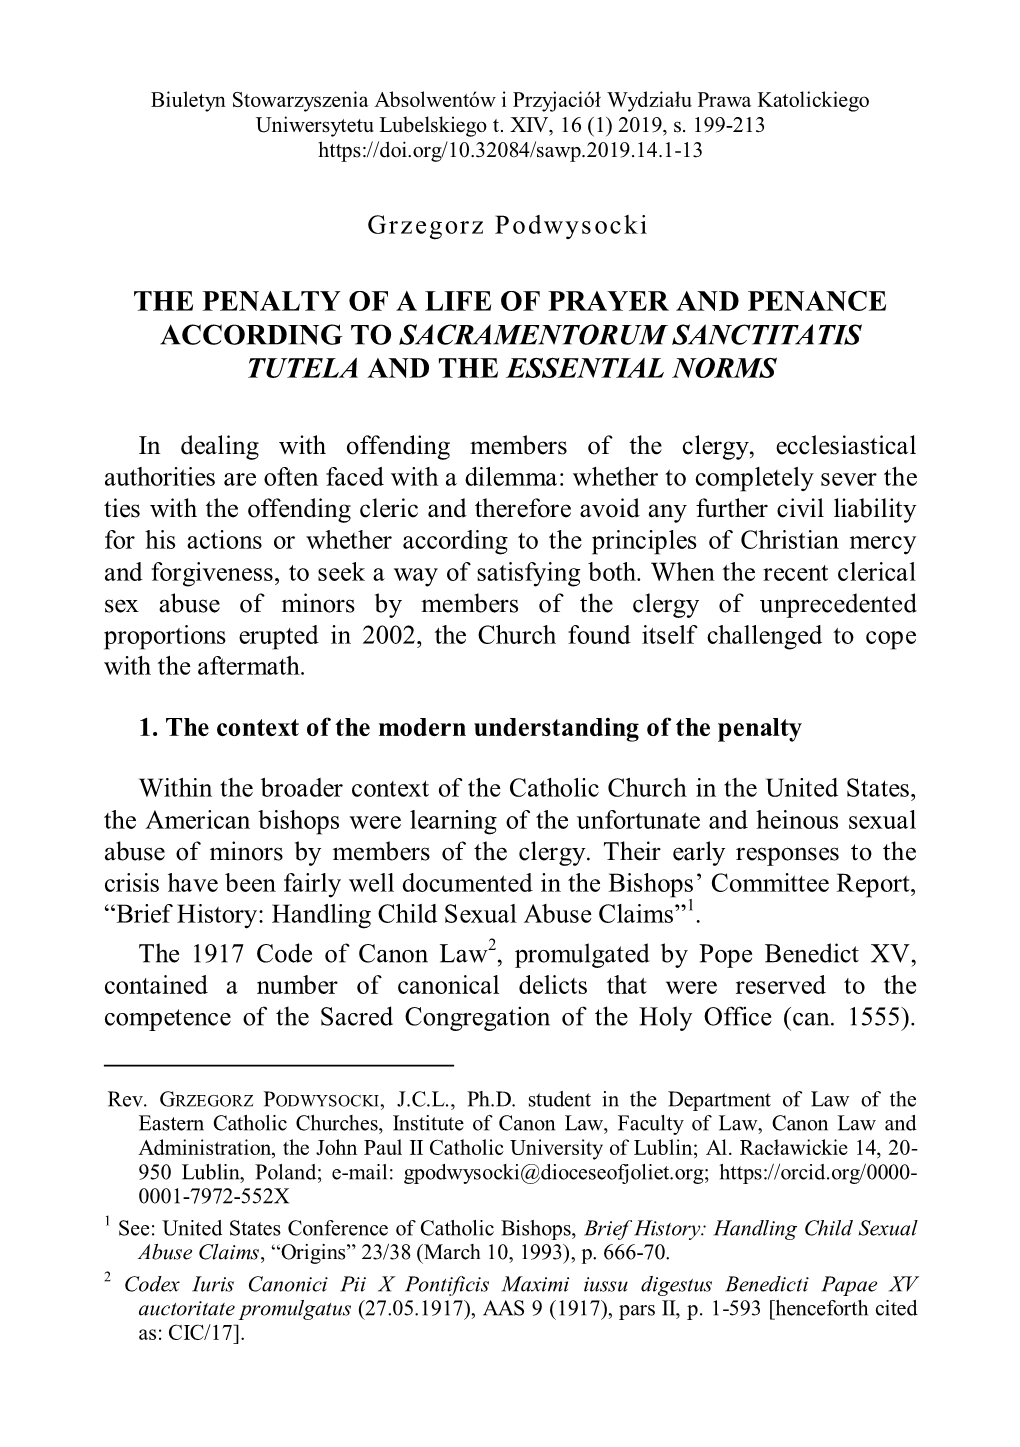 The Penalty of a Life of Prayer and Penance According to Sacramentorum Sanctitatis Tutela and the Essential Norms